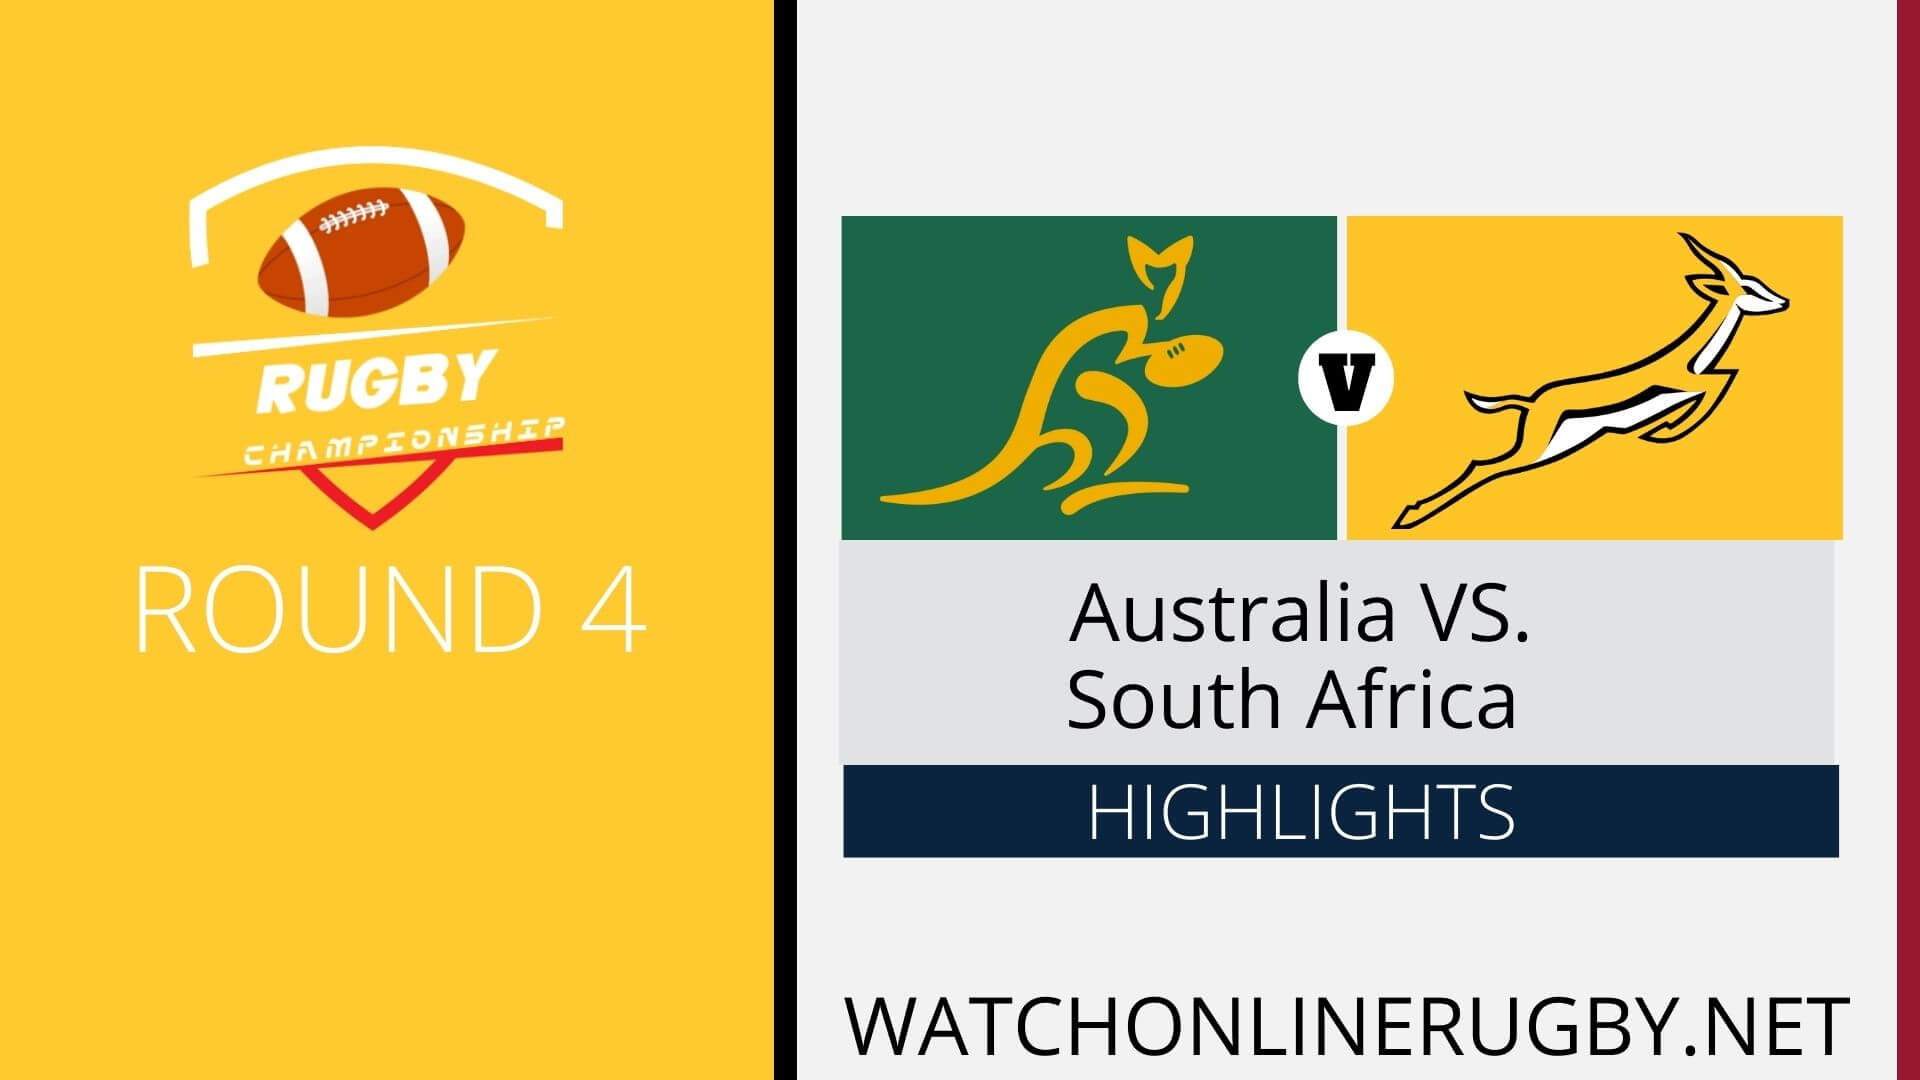 Australia Vs South Africa Rugby Championship 2022 RD 4